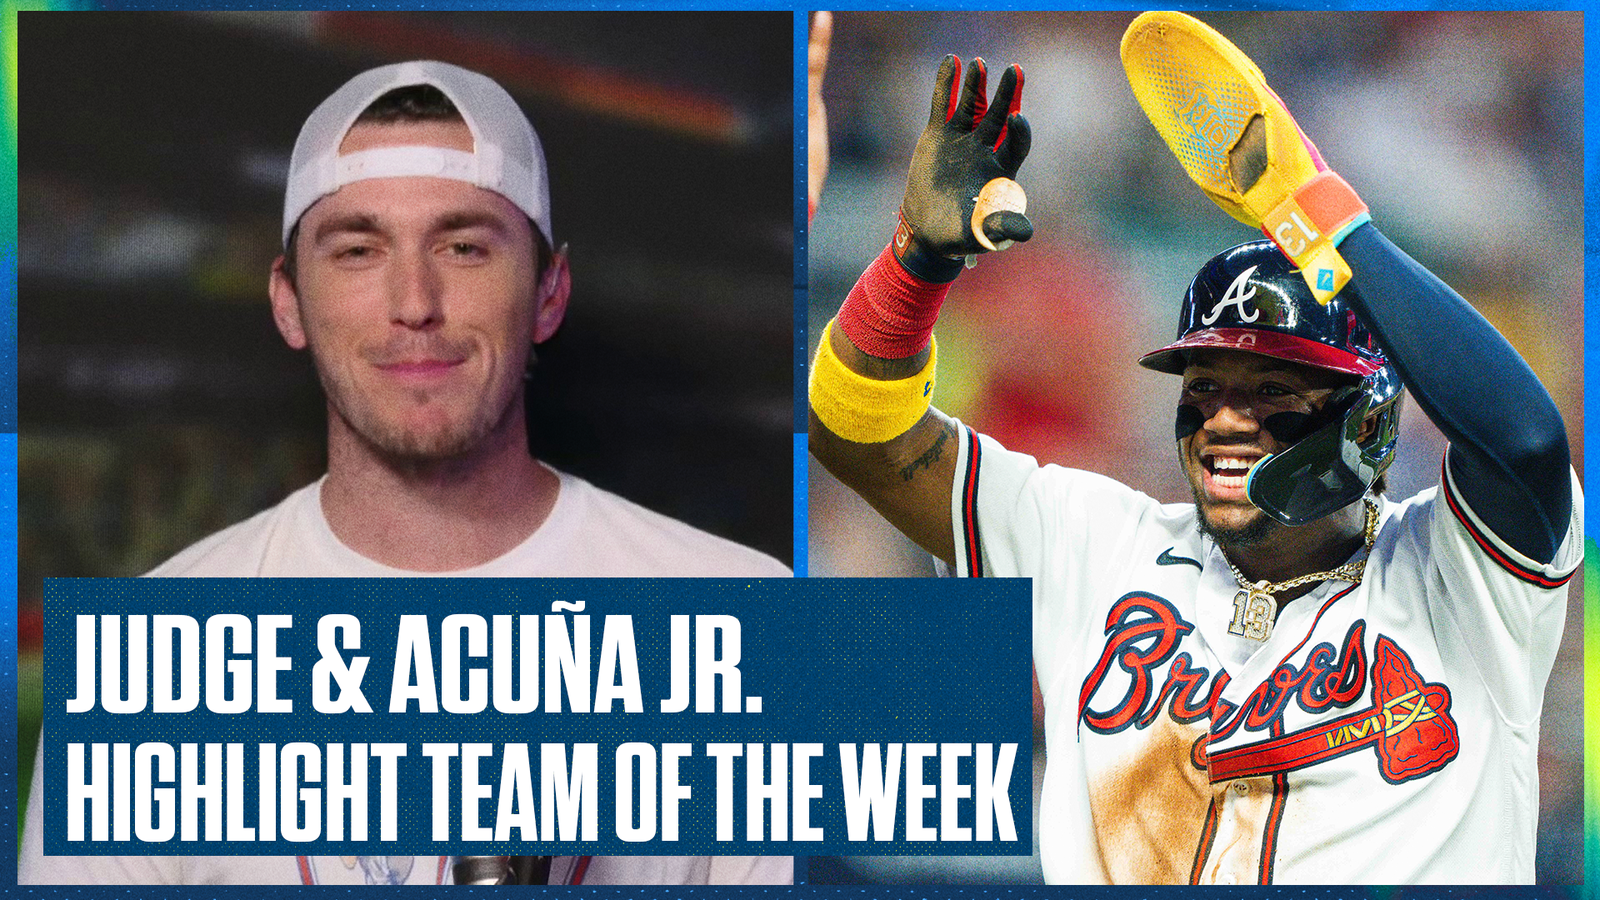 Aaron Judge of the Yankees and Ronald Acuna Jr.  of the Braves highlight Ben's Team of the Week 